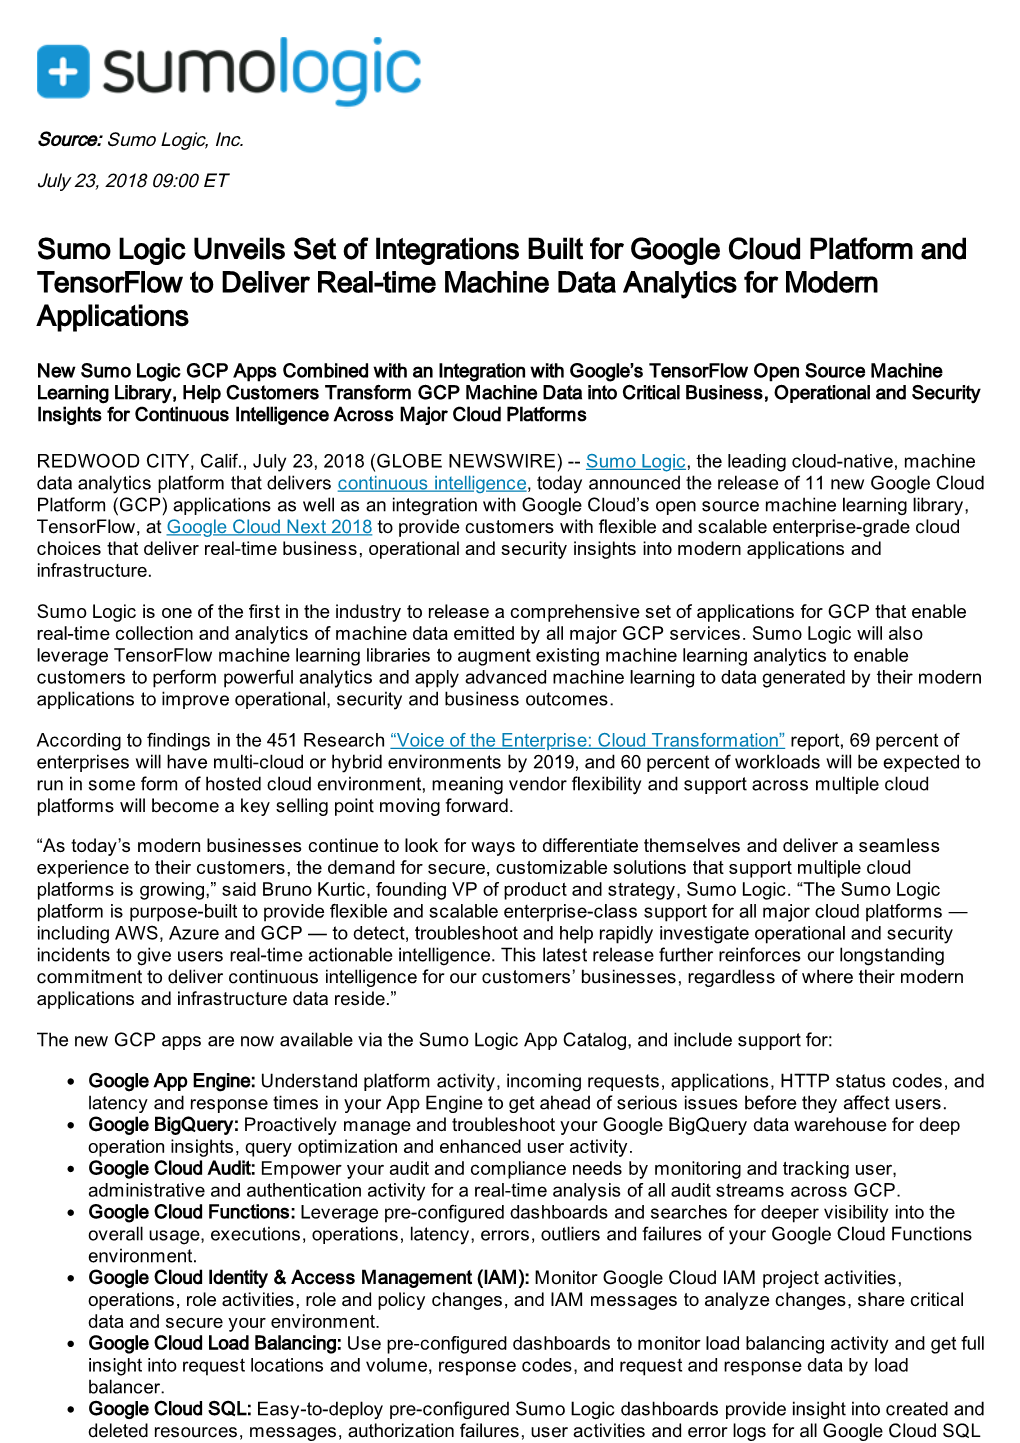 Sumo Logic Unveils Set of Integrations Built for Google Cloud Platform and Tensorflow to Deliver Real-Time Machine Data Analytics for Modern Applications